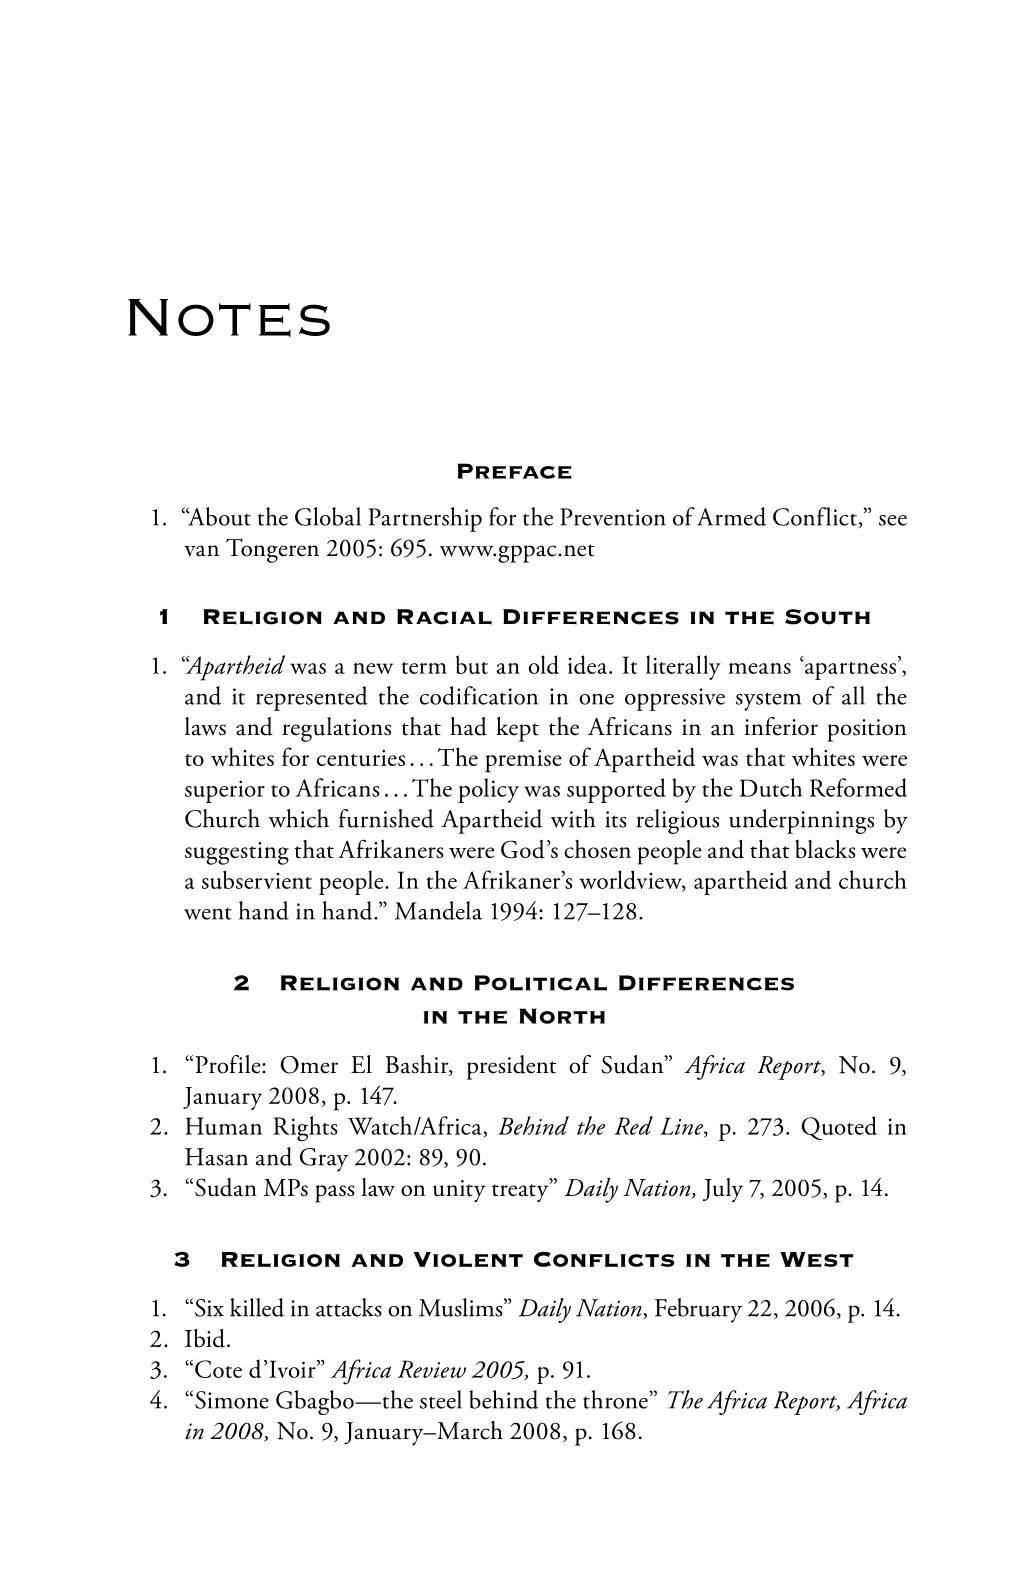 Preface 1 Religion and Racial Differences in the South 2 Religion